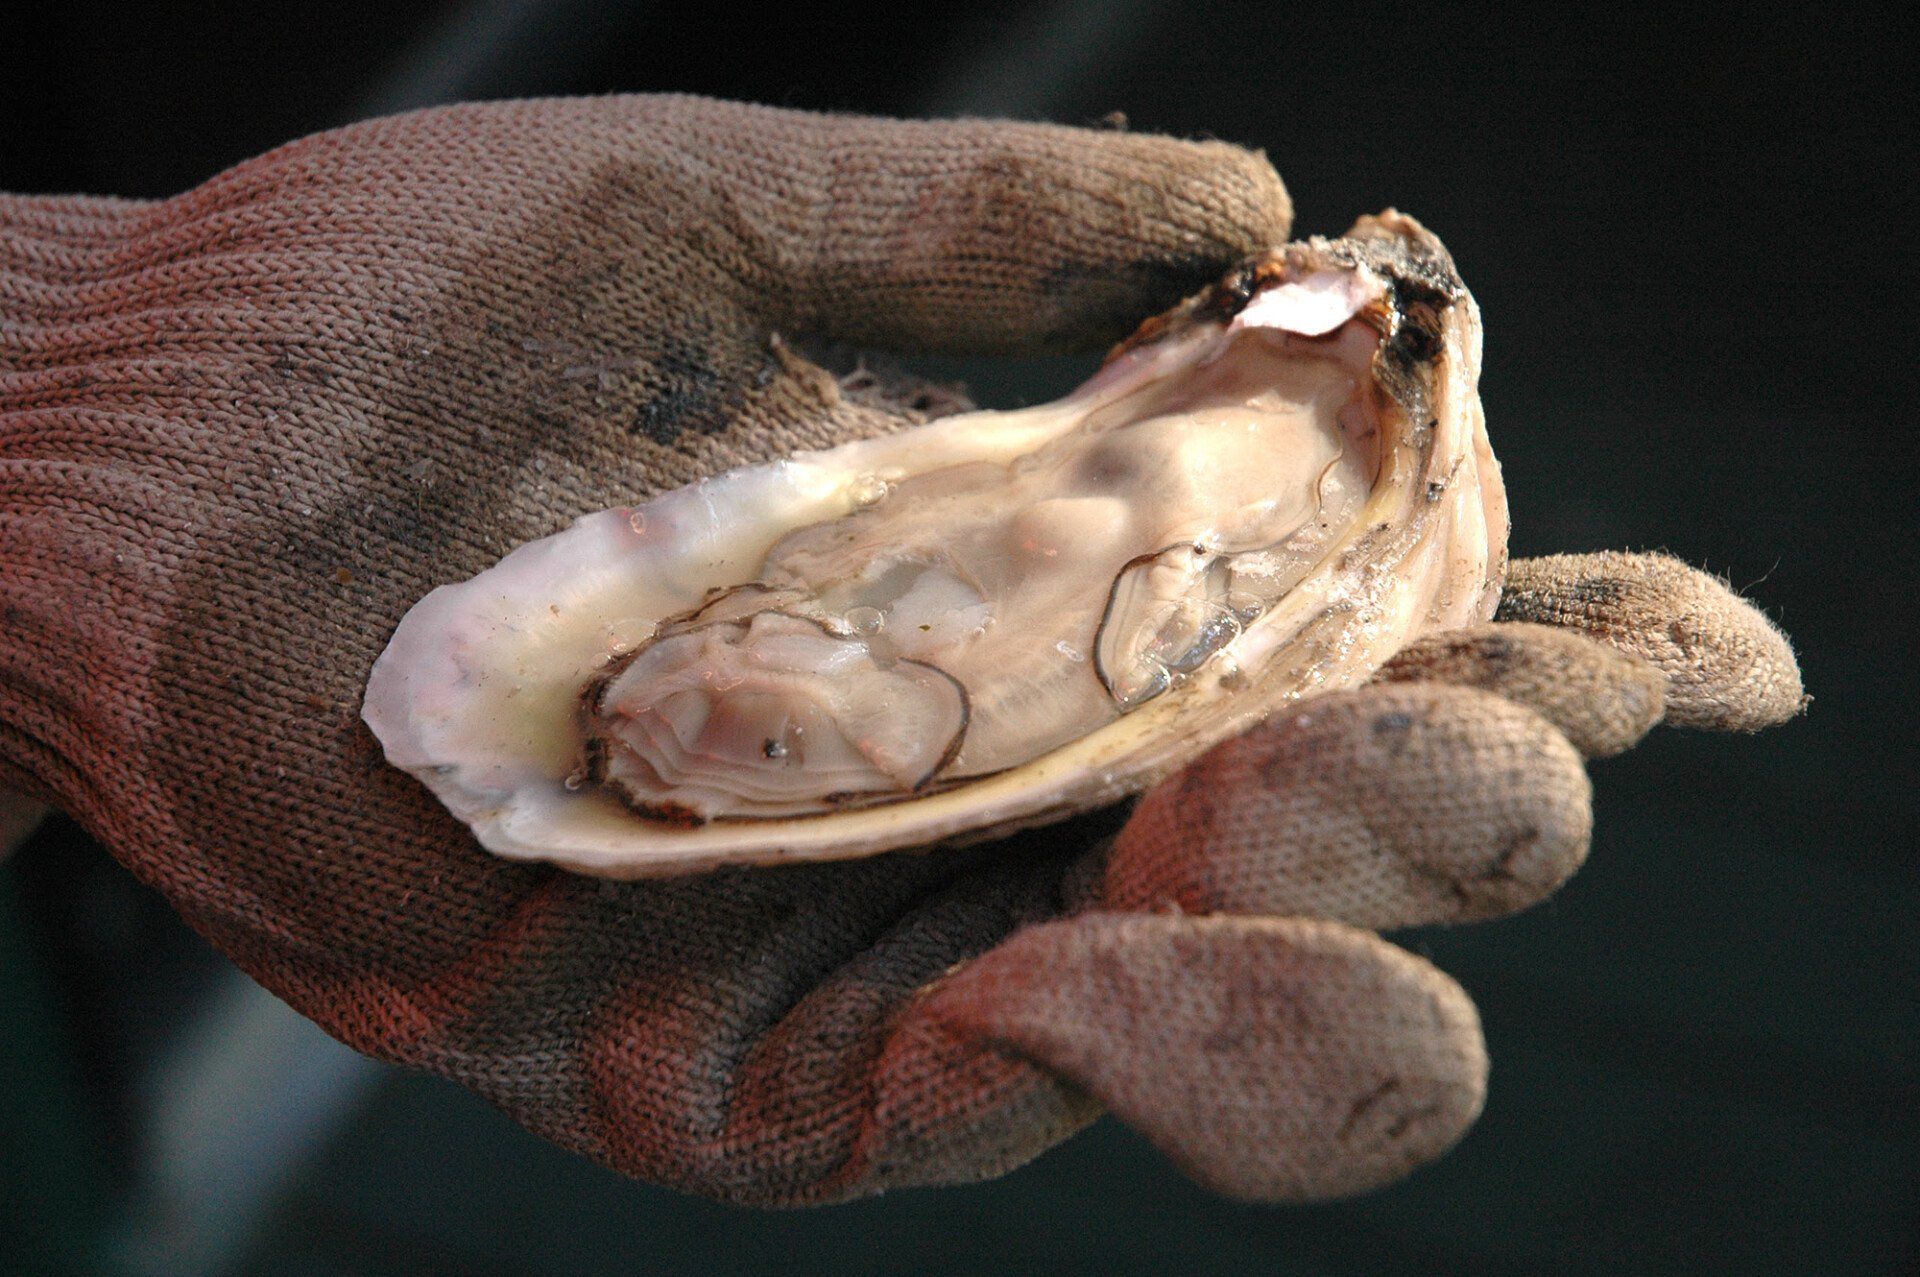  Fort Morgan Oyster Fest slated for February 25th 